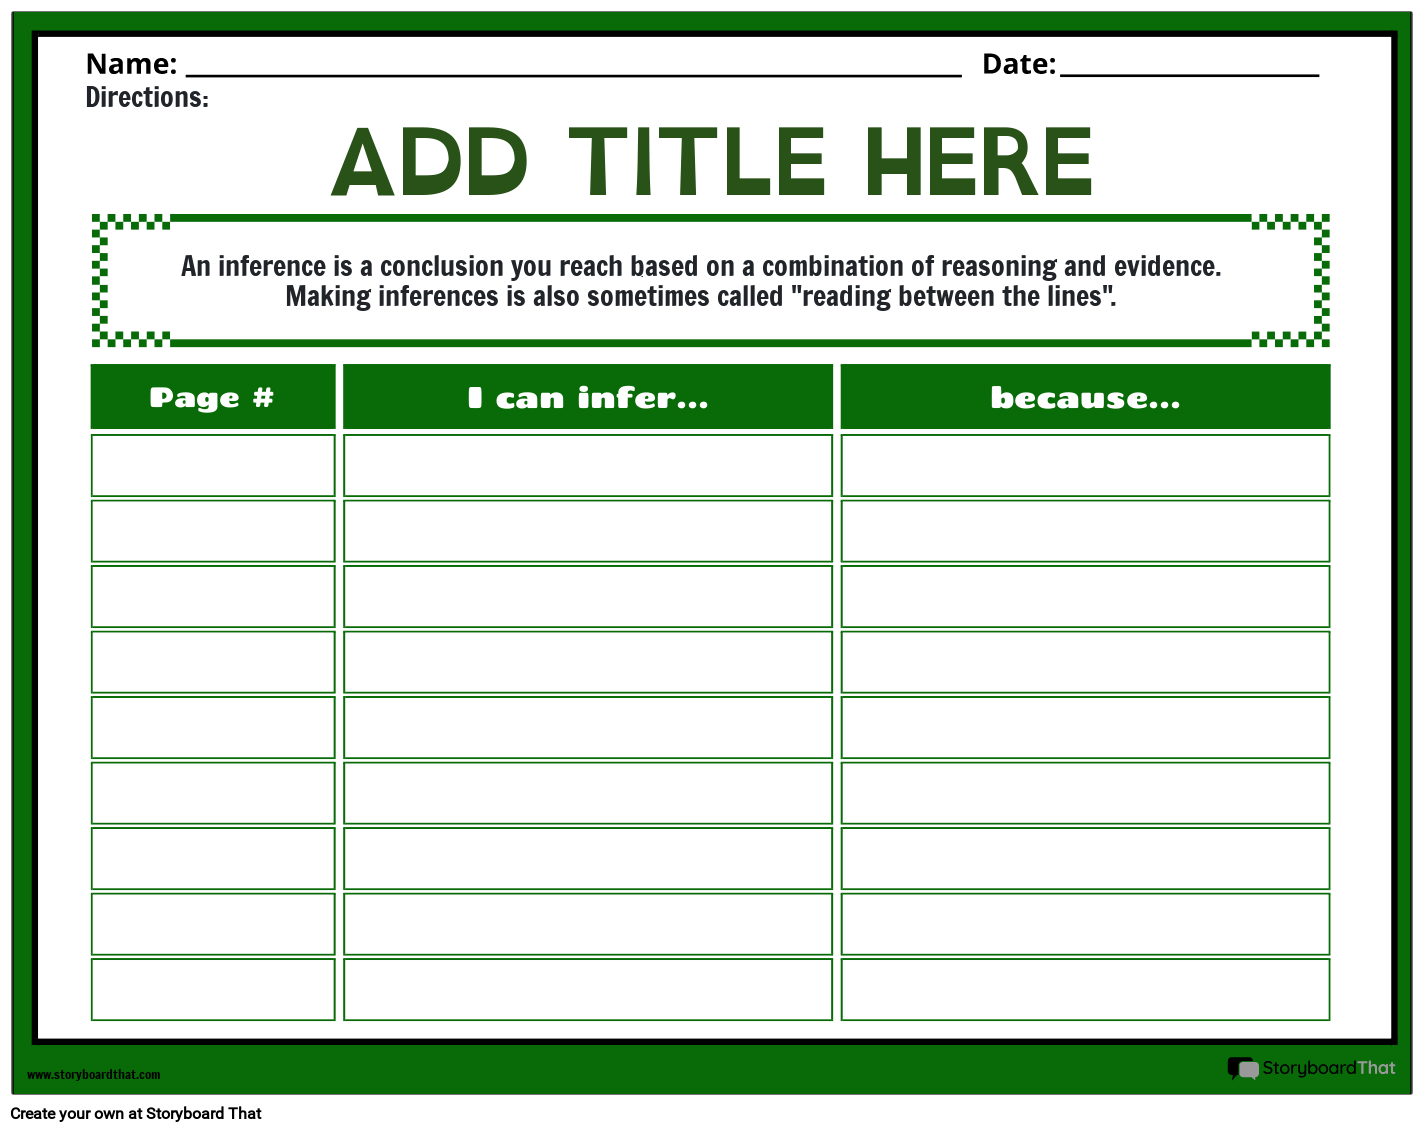 Inferencing Worksheet Design with Green Background